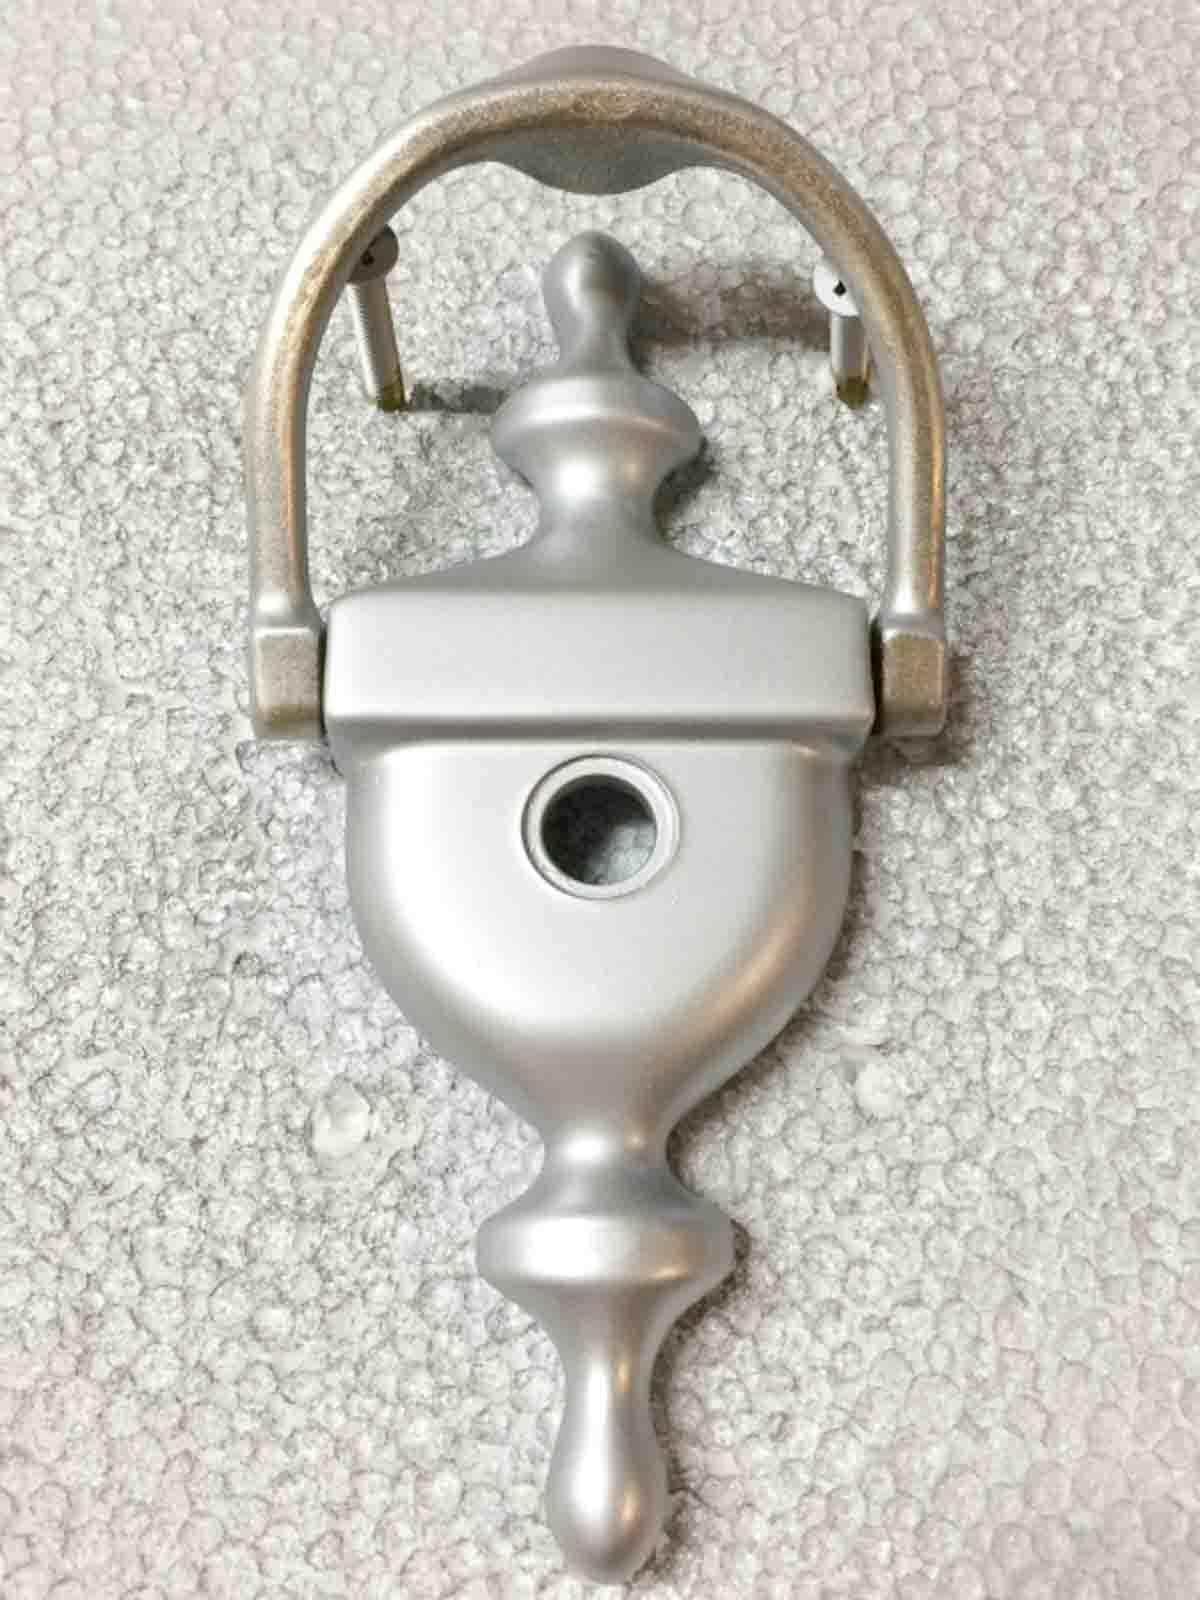 partially spray painted door knocker on styrofoam sheet with screws holding handle off the surface